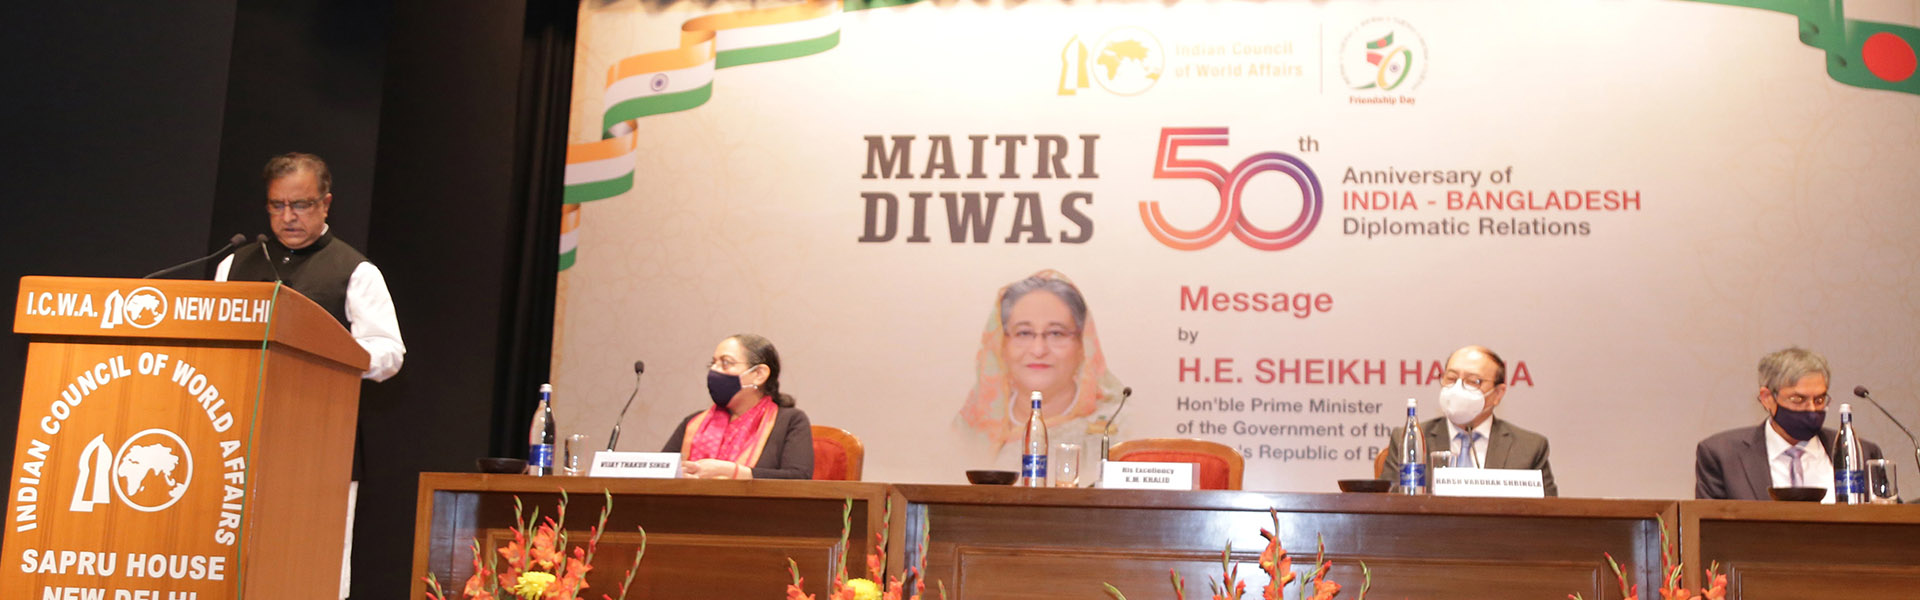 H.E. Mr. K.M. Khalid, Honourable State Minister of Culture, Government of Peoples Republic of Bangladesh delivering his Remarks at Maitri Diwas, 6 December 2021.